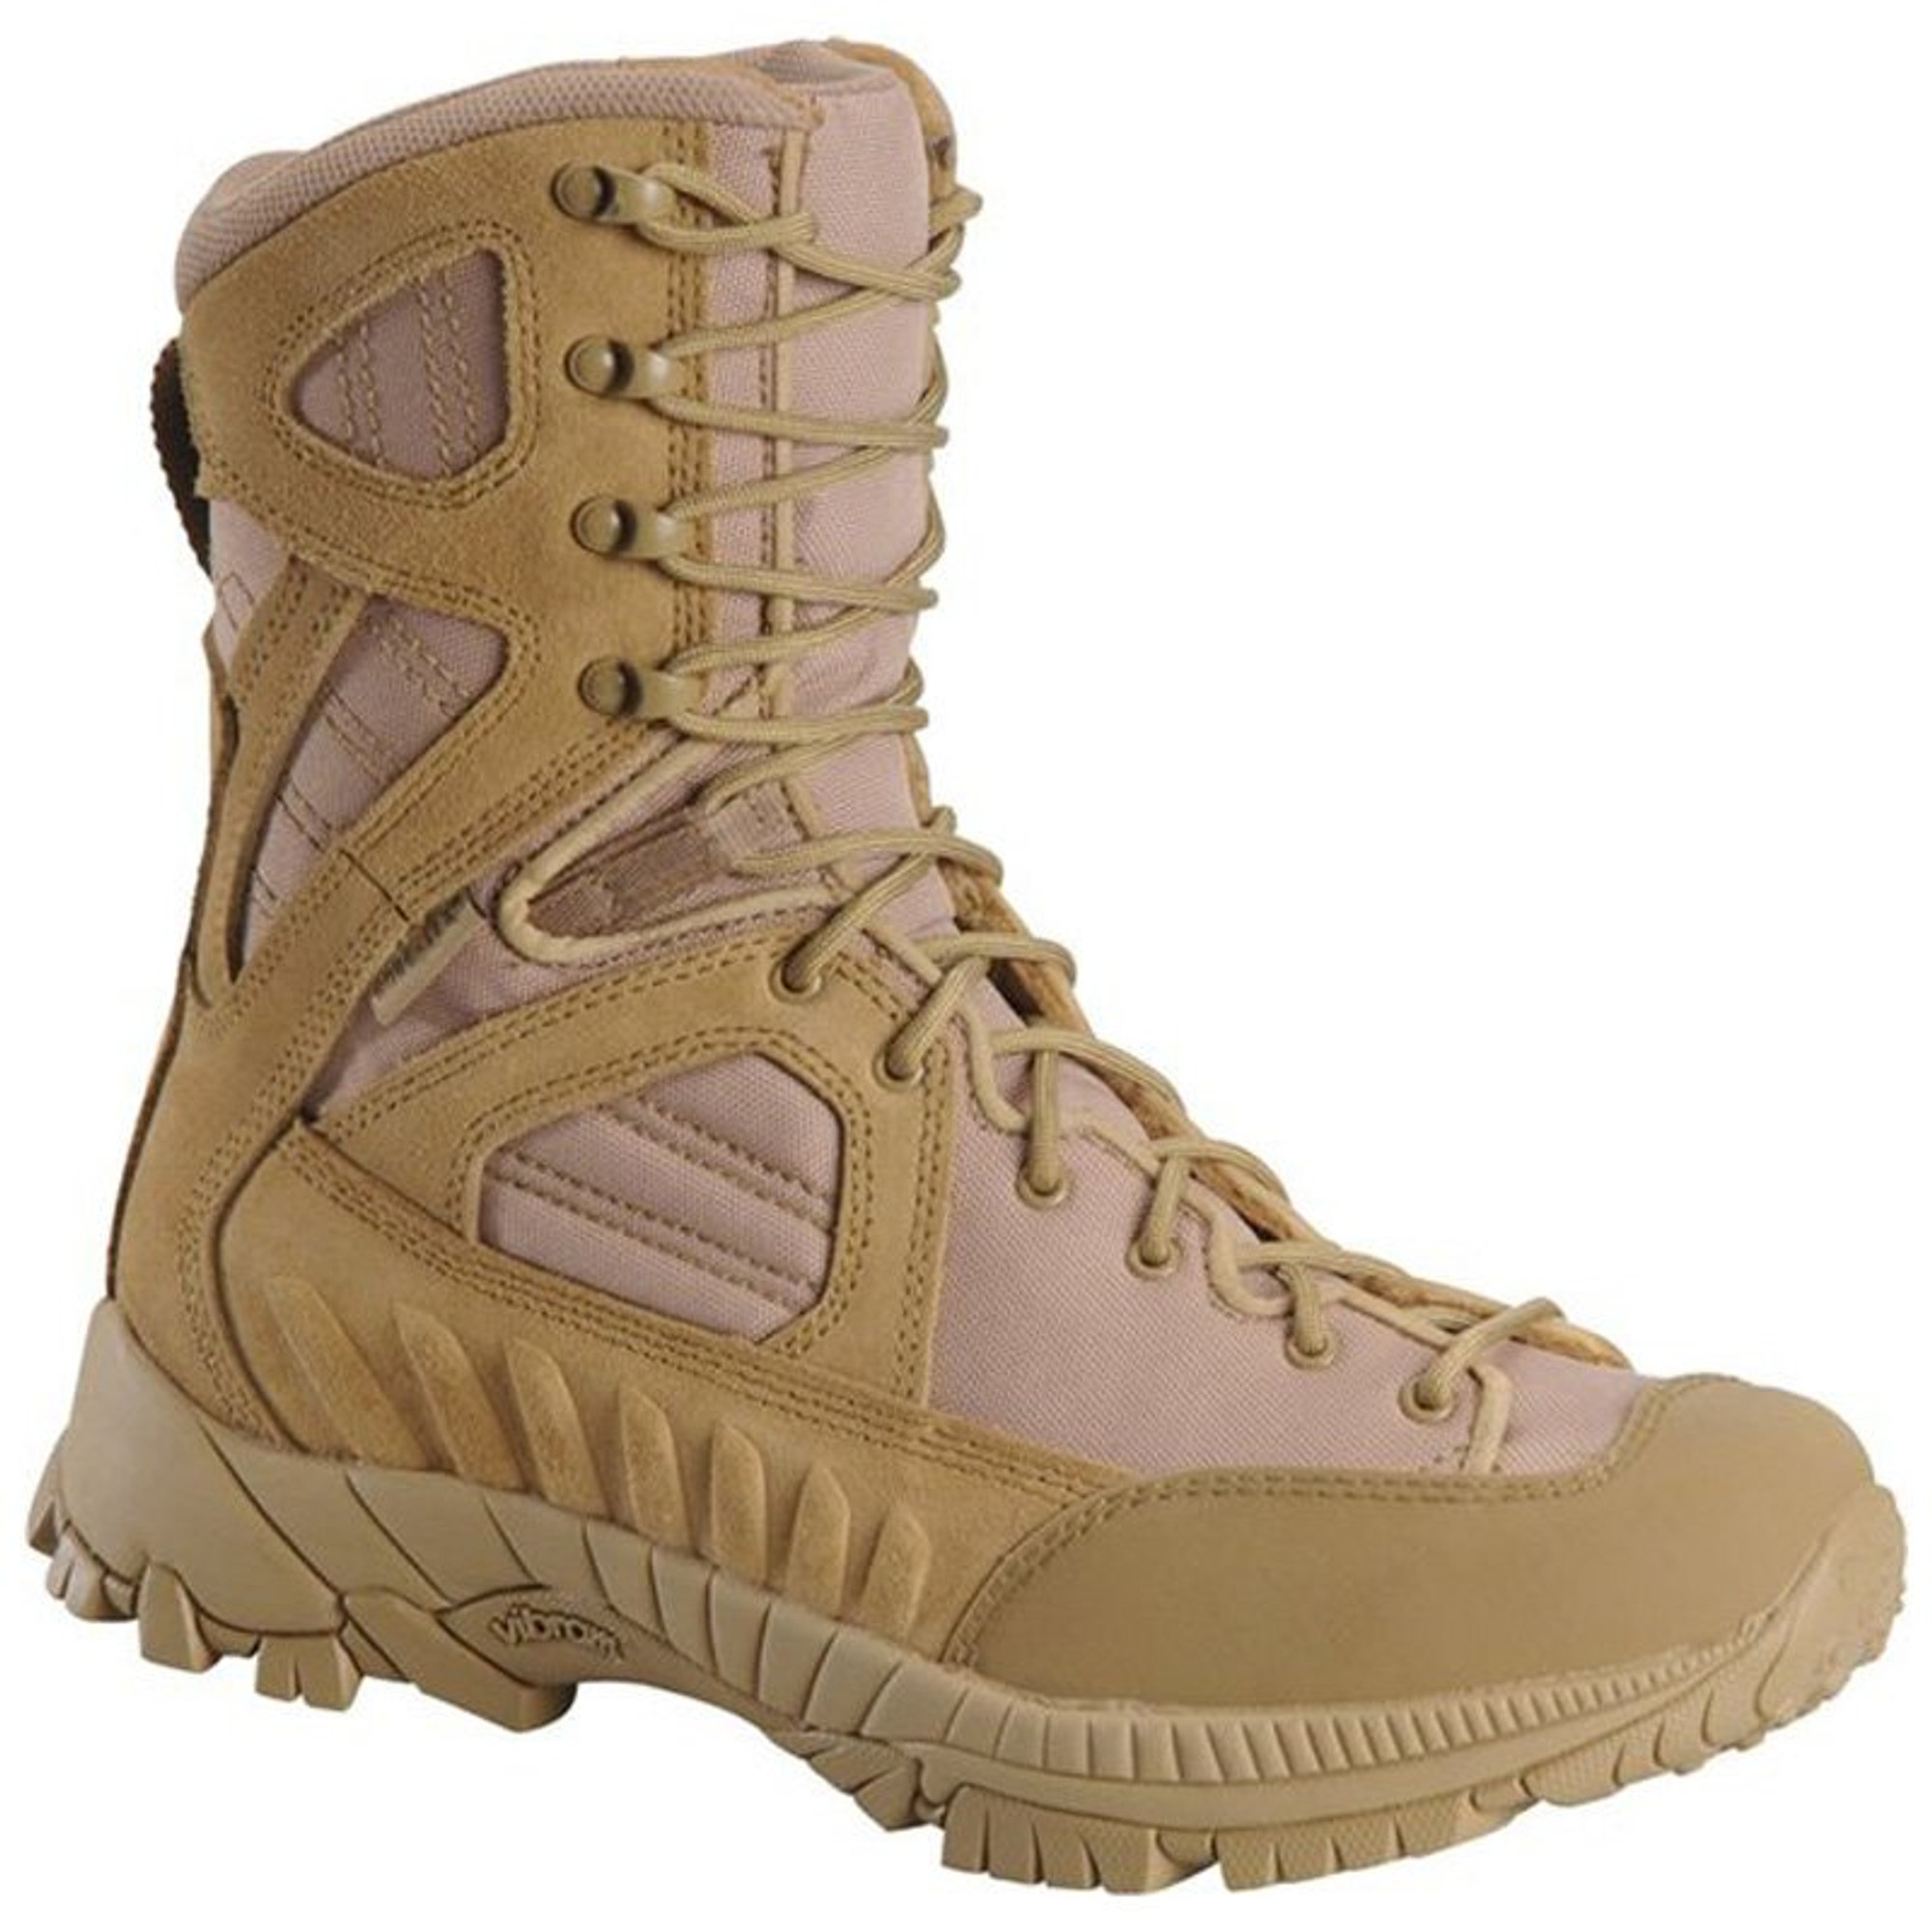 Corcoran 8" Lace to Toe Waterproof Tactical All-Terrain Hiker